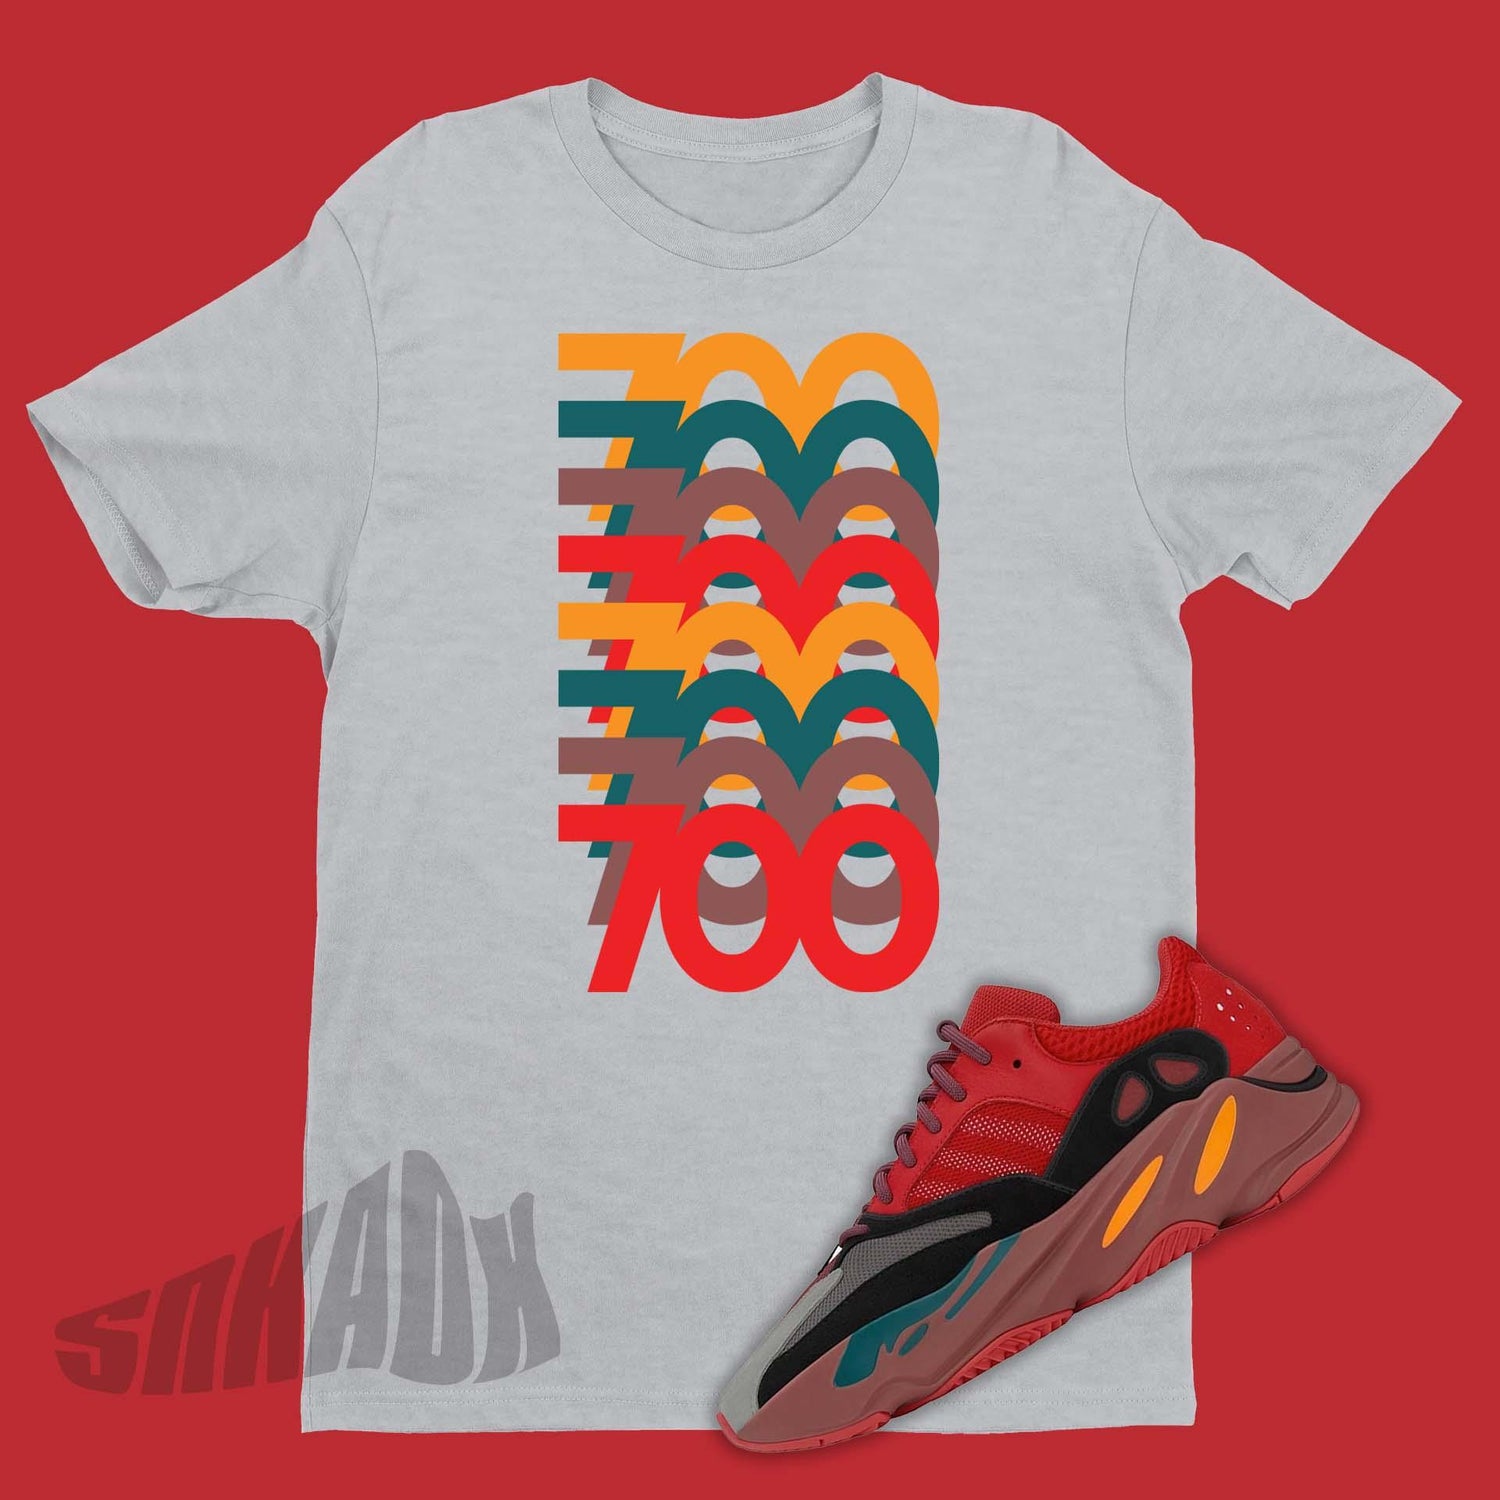 700 Stack Shirt To Match Yeezy Boost 700 Hi-Res Red - SNKADX